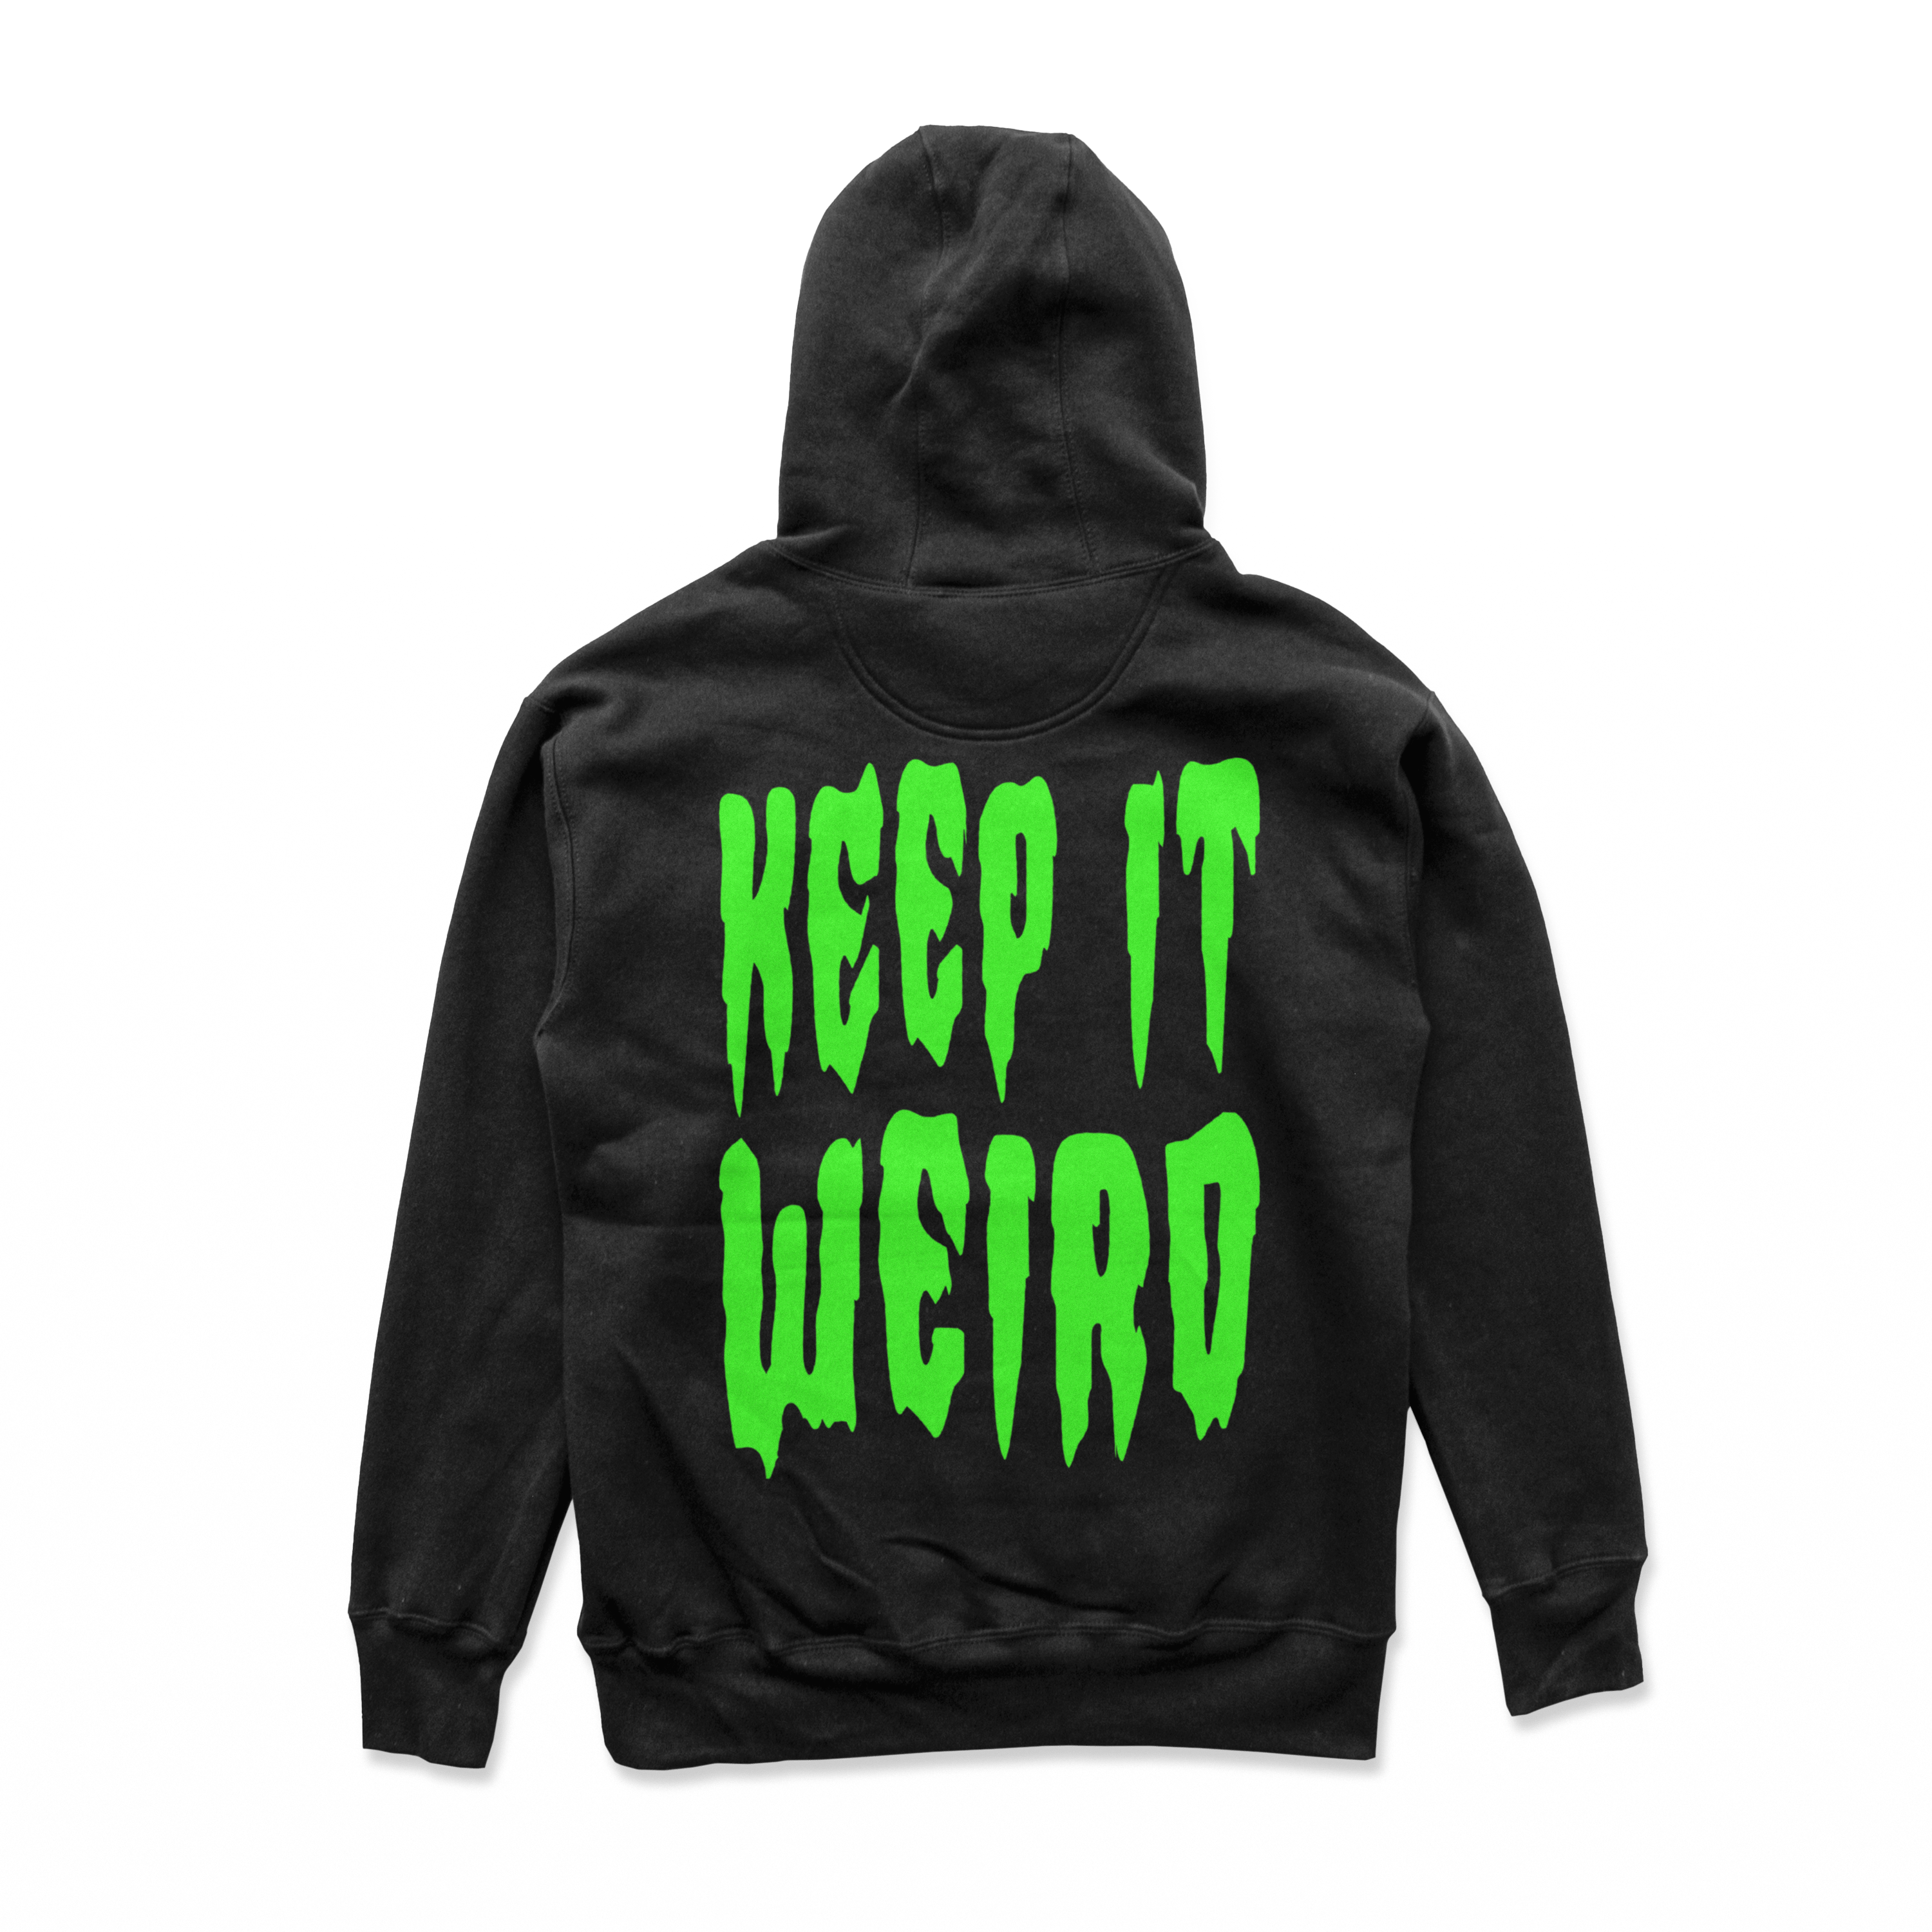 Object of Power nerdy gamer anime tabletop roleplaying Hoodie Keep It Weird Hoodie Black / S